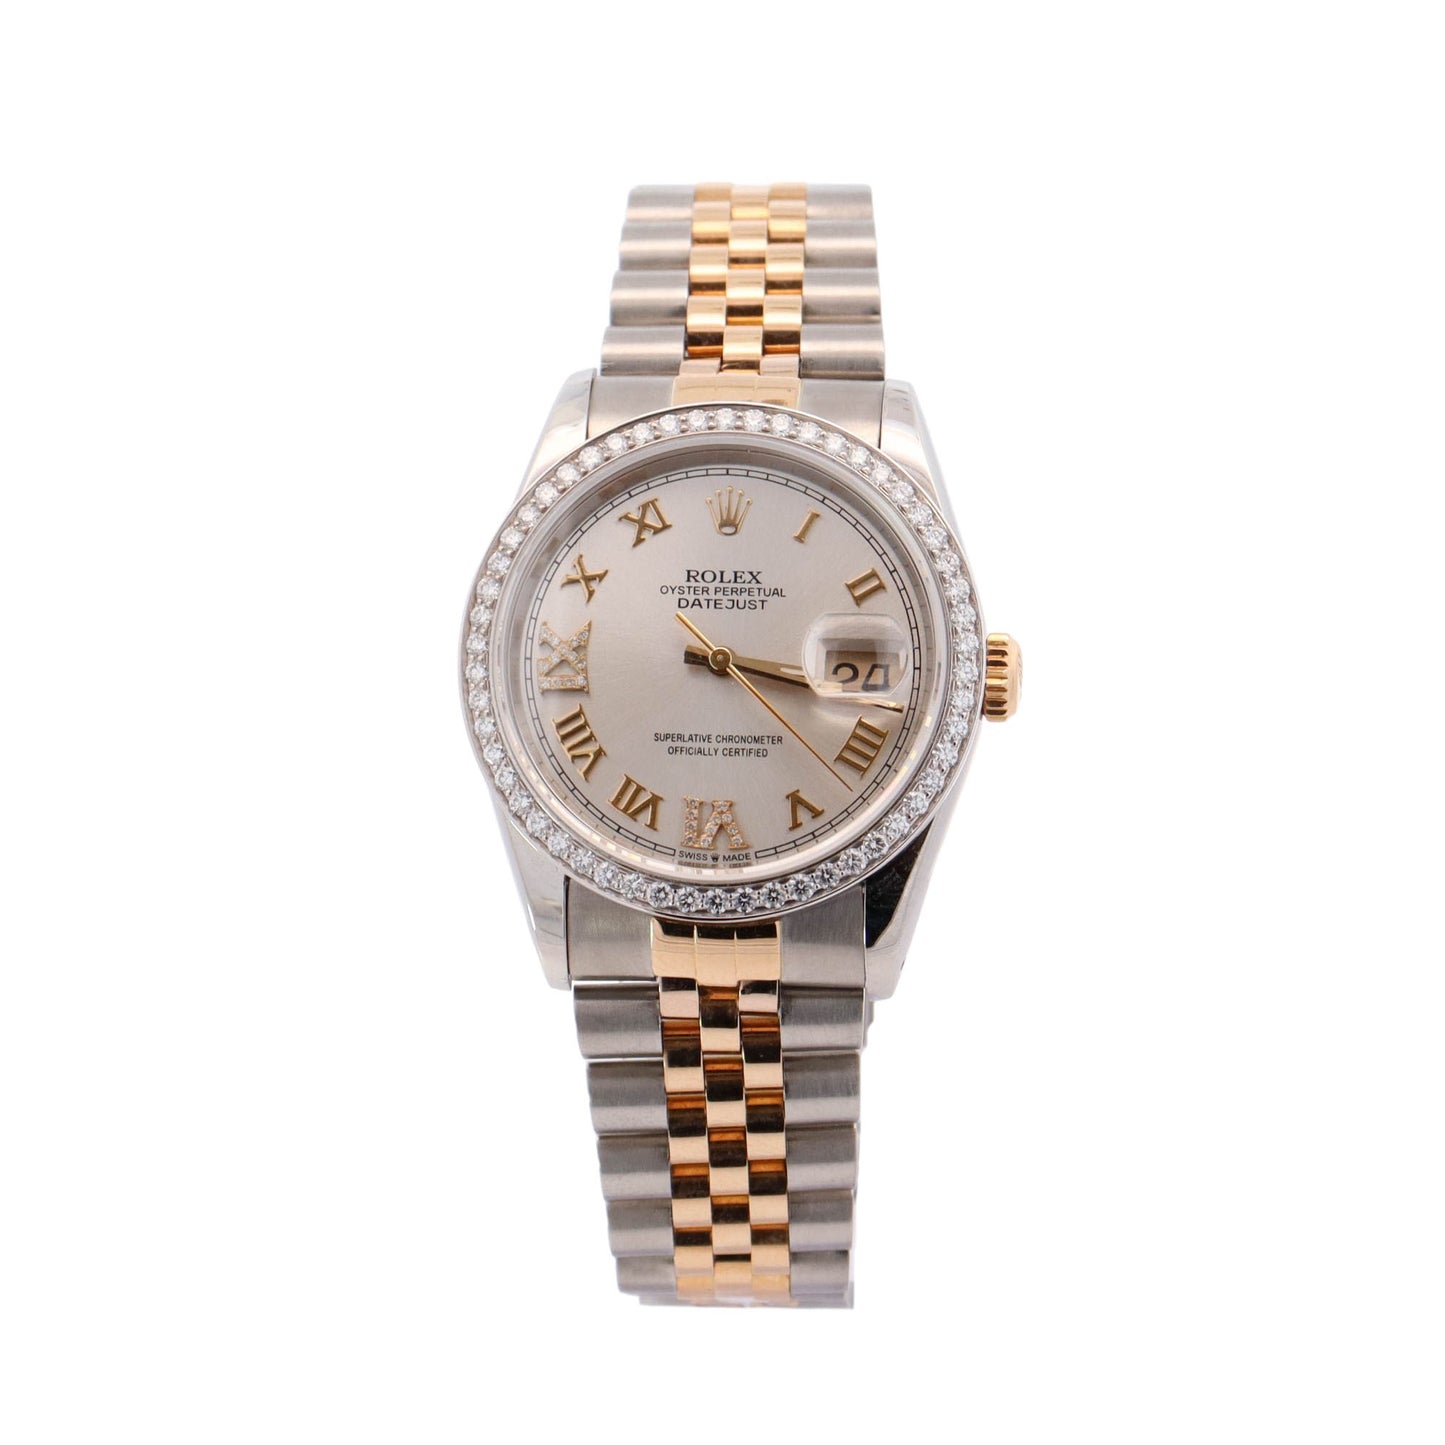 Rolex Datejust Two Tone Yellow Gold & Steel 36mm Champagne Stick Dial Watch Reference #: 16233 - Happy Jewelers Fine Jewelry Lifetime Warranty